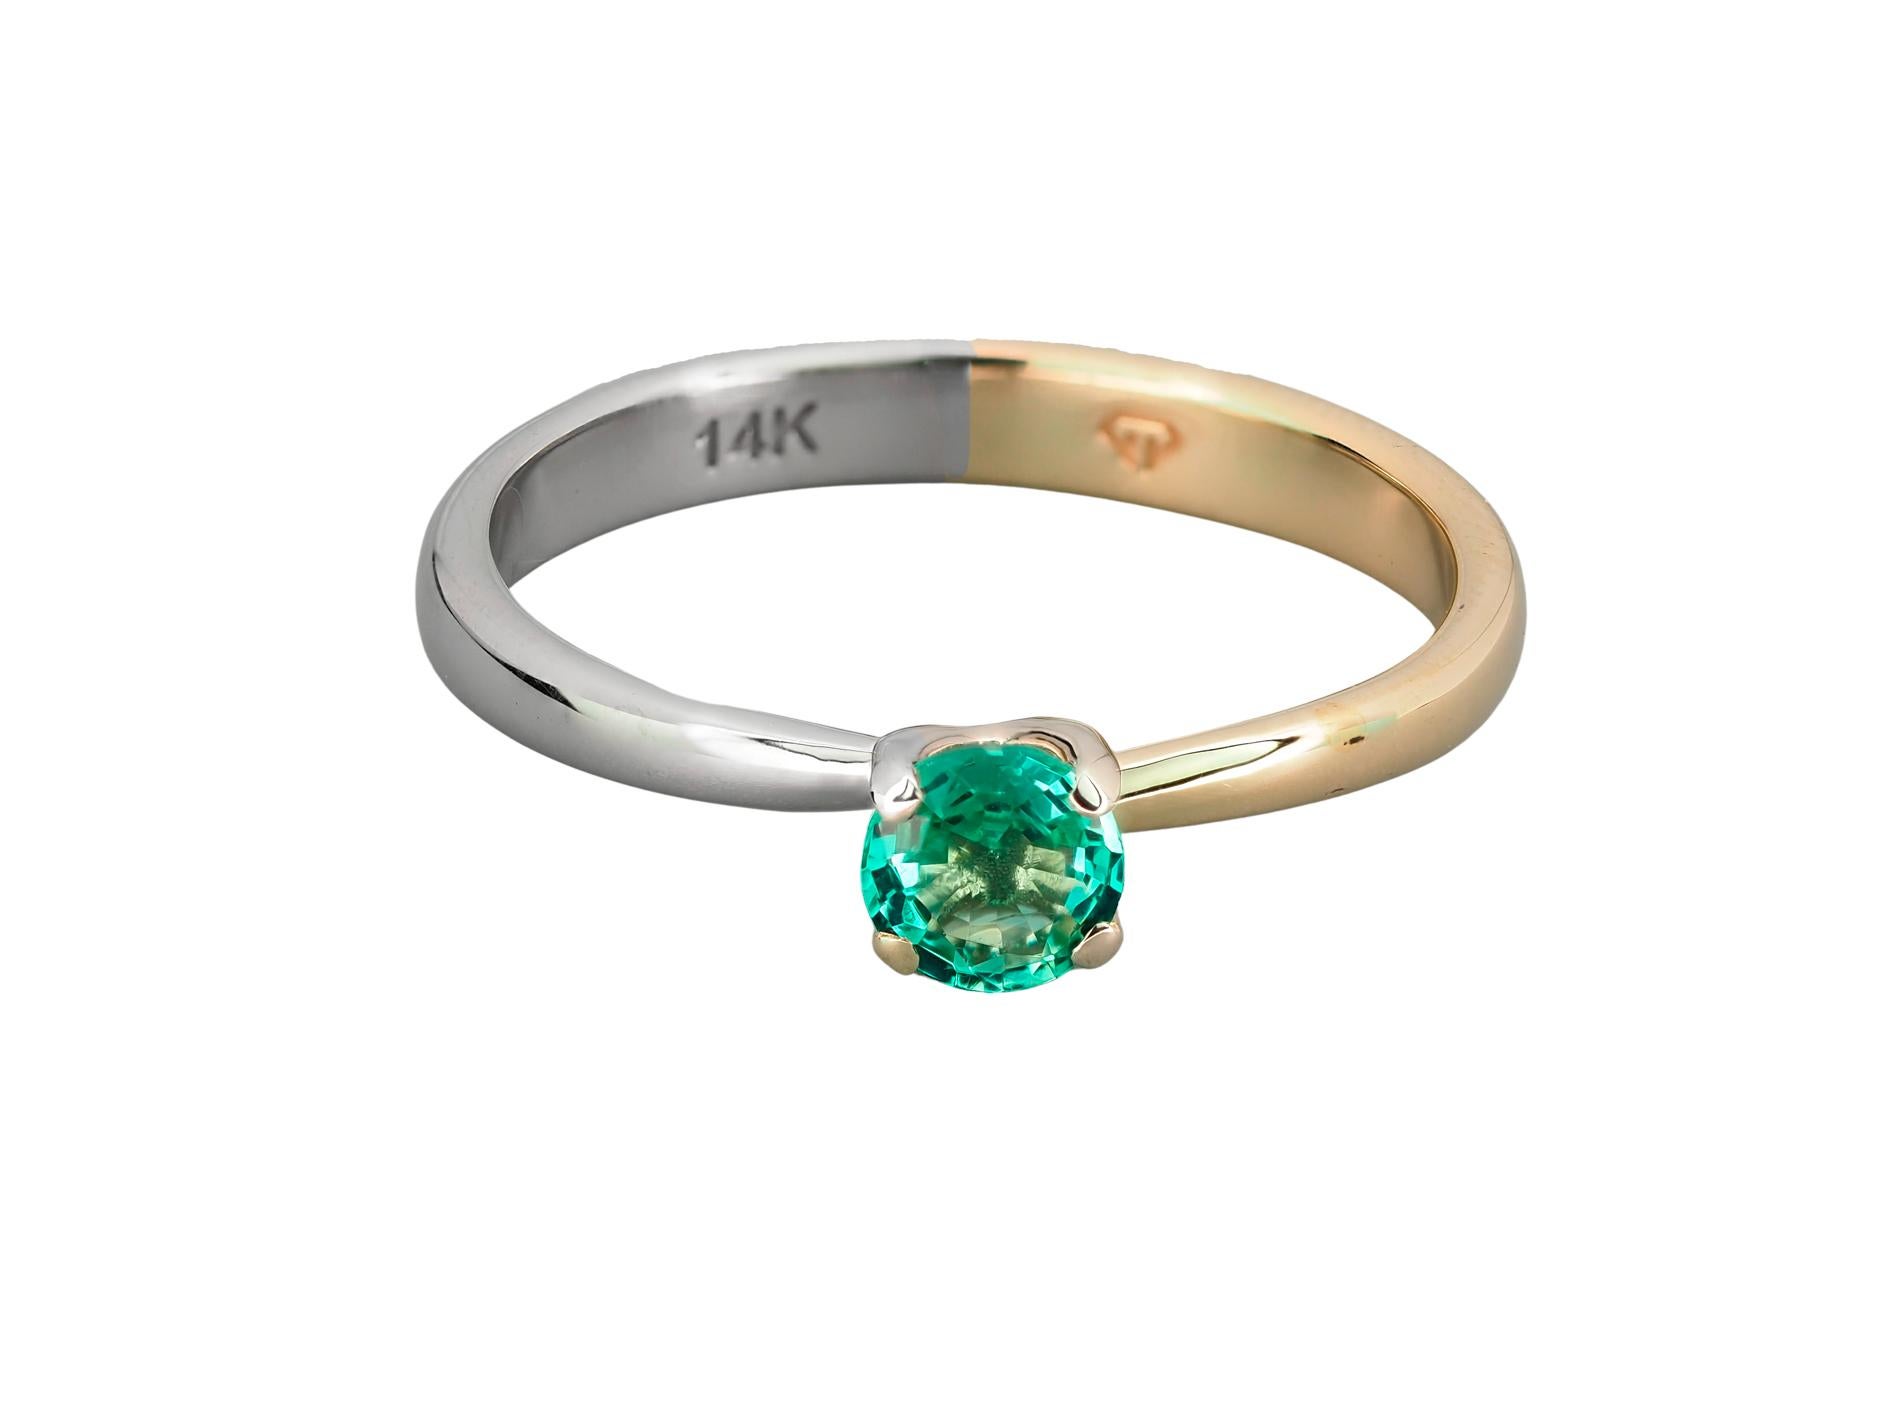 Emerald 14k gold ring. 
Round emerald ring. Two color gold ring. White and yellow gold ring. Dainty Emerald engagement ring. May Birthstone.

Metal: 14k yellow and white gold
Weight - 2.6 g. depends from size.

Central stone: emerald
Cut: